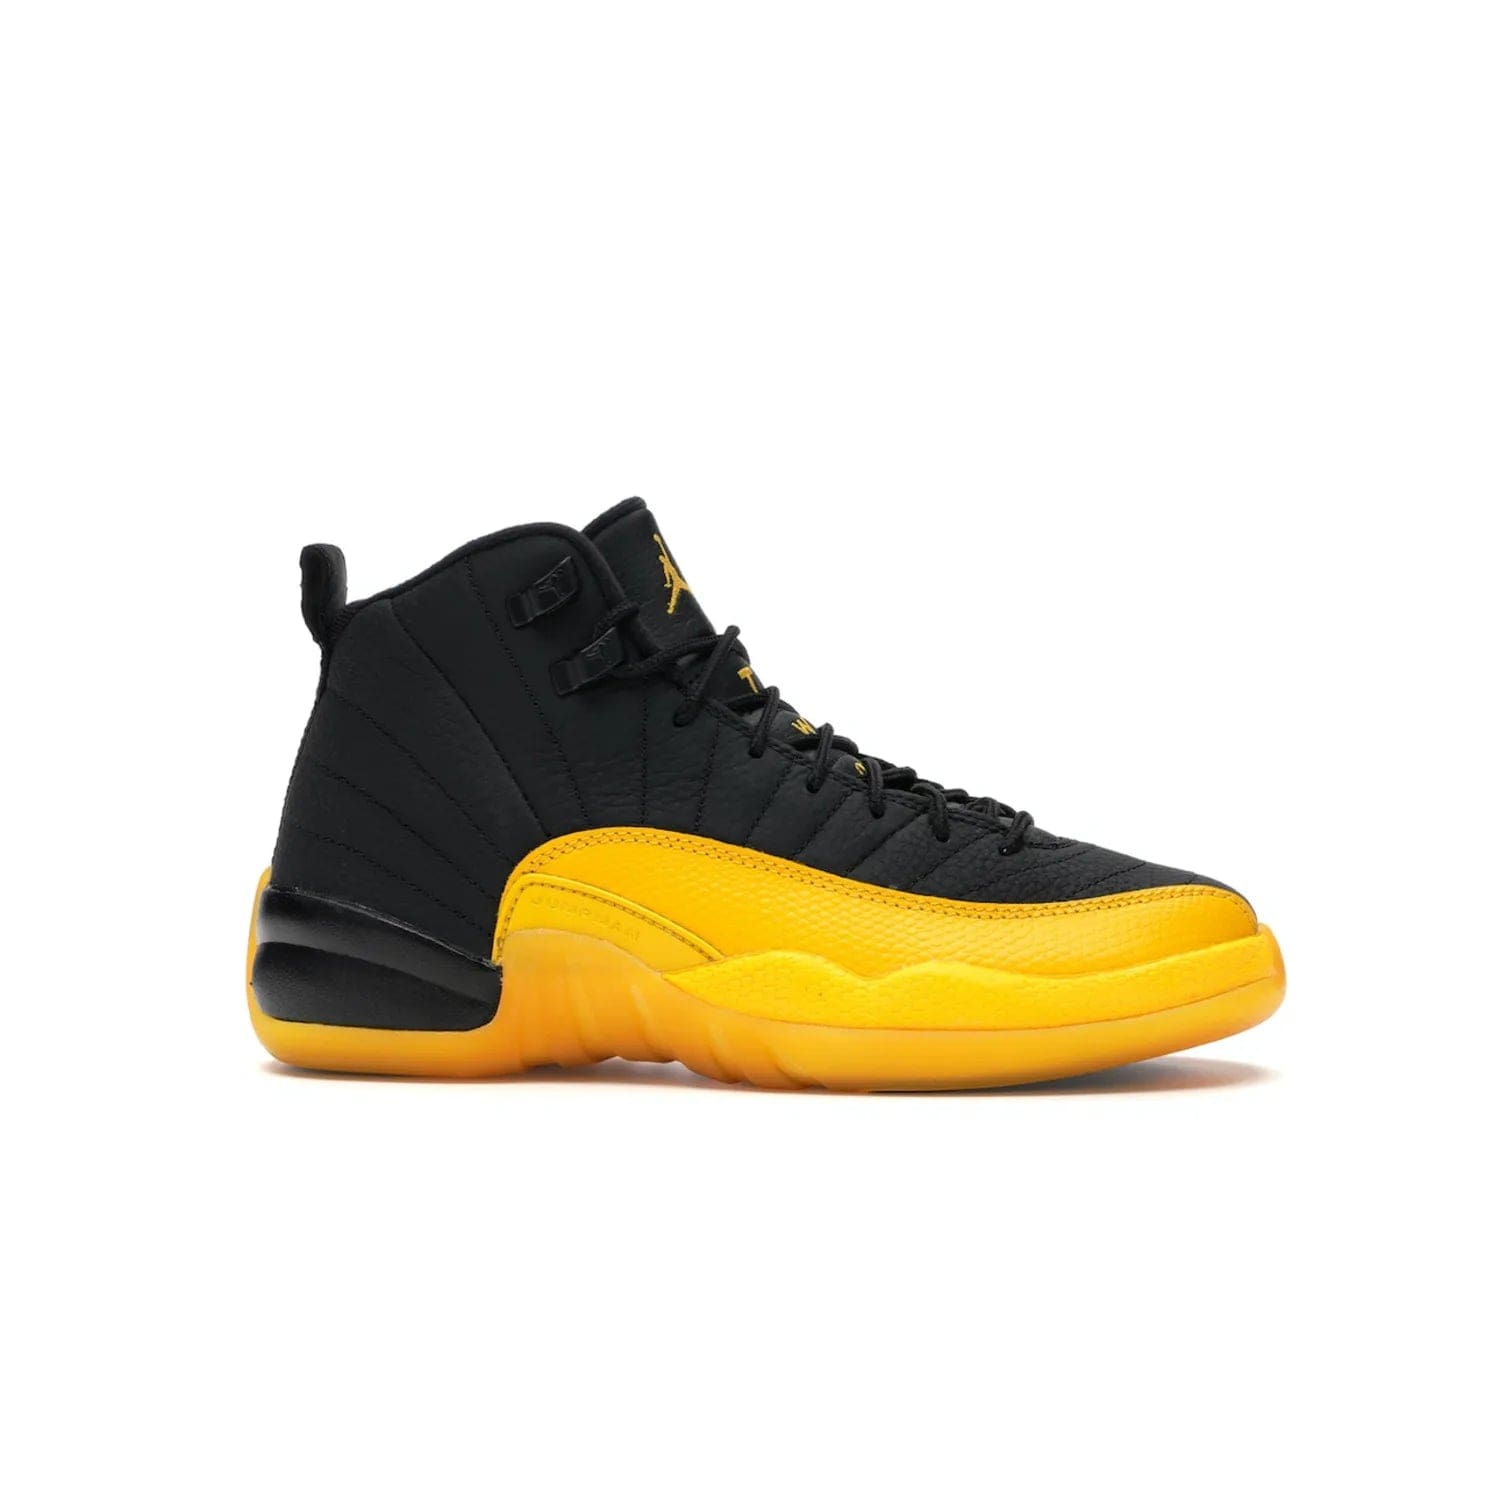 Jordan 12 Retro Black University Gold (GS) - Image 2 - Only at www.BallersClubKickz.com - Upgrade your kid's shoe collection with the Jordan 12 Retro Black University Gold. With classic style, black tumbled leather upper, and University Gold accents, it's a great summer look. Out July 2020.